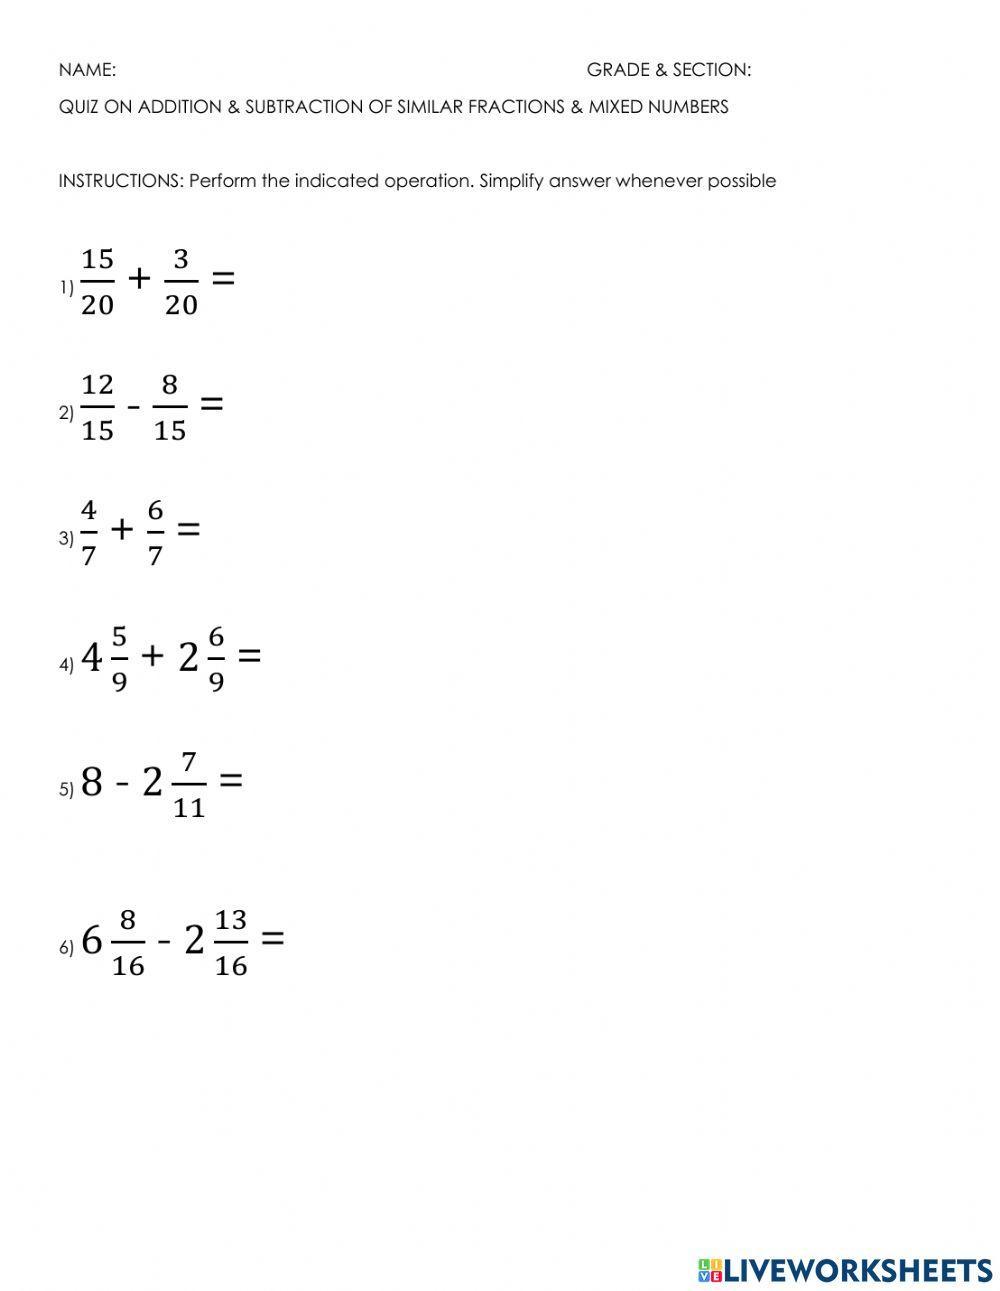 Addition & subtraction of similar fractions & mixed numbers